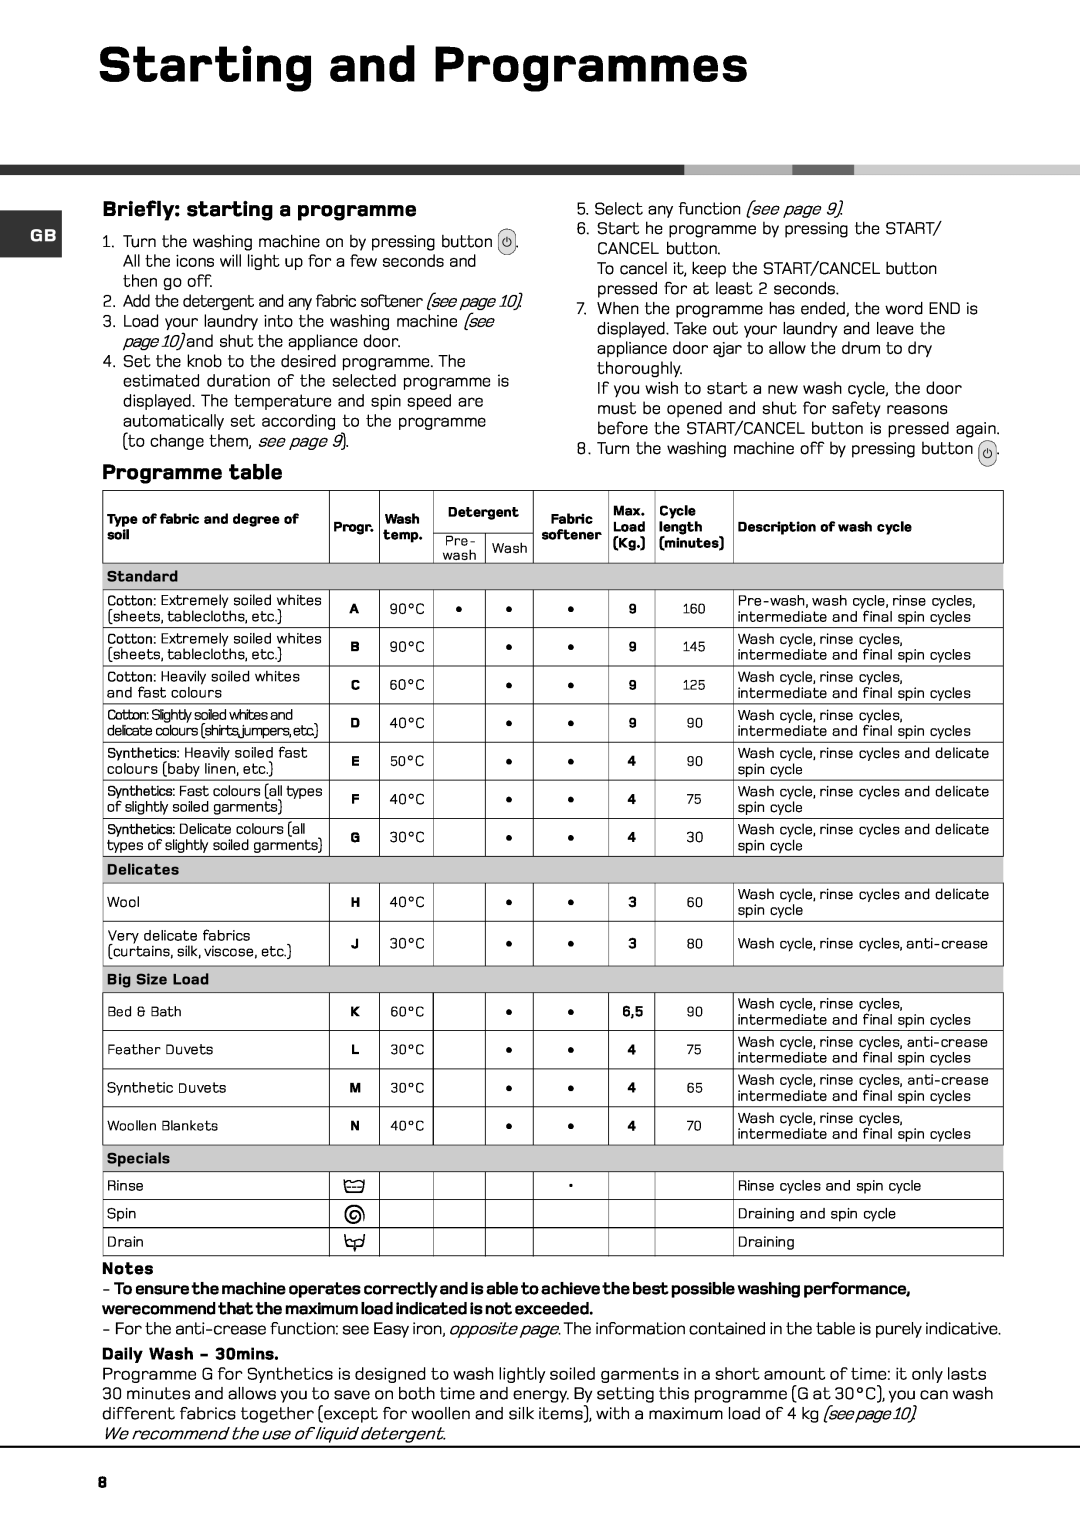 Hotpoint ET 1400 manual Starting and Programmes, Briefly starting a programme, Programme table 